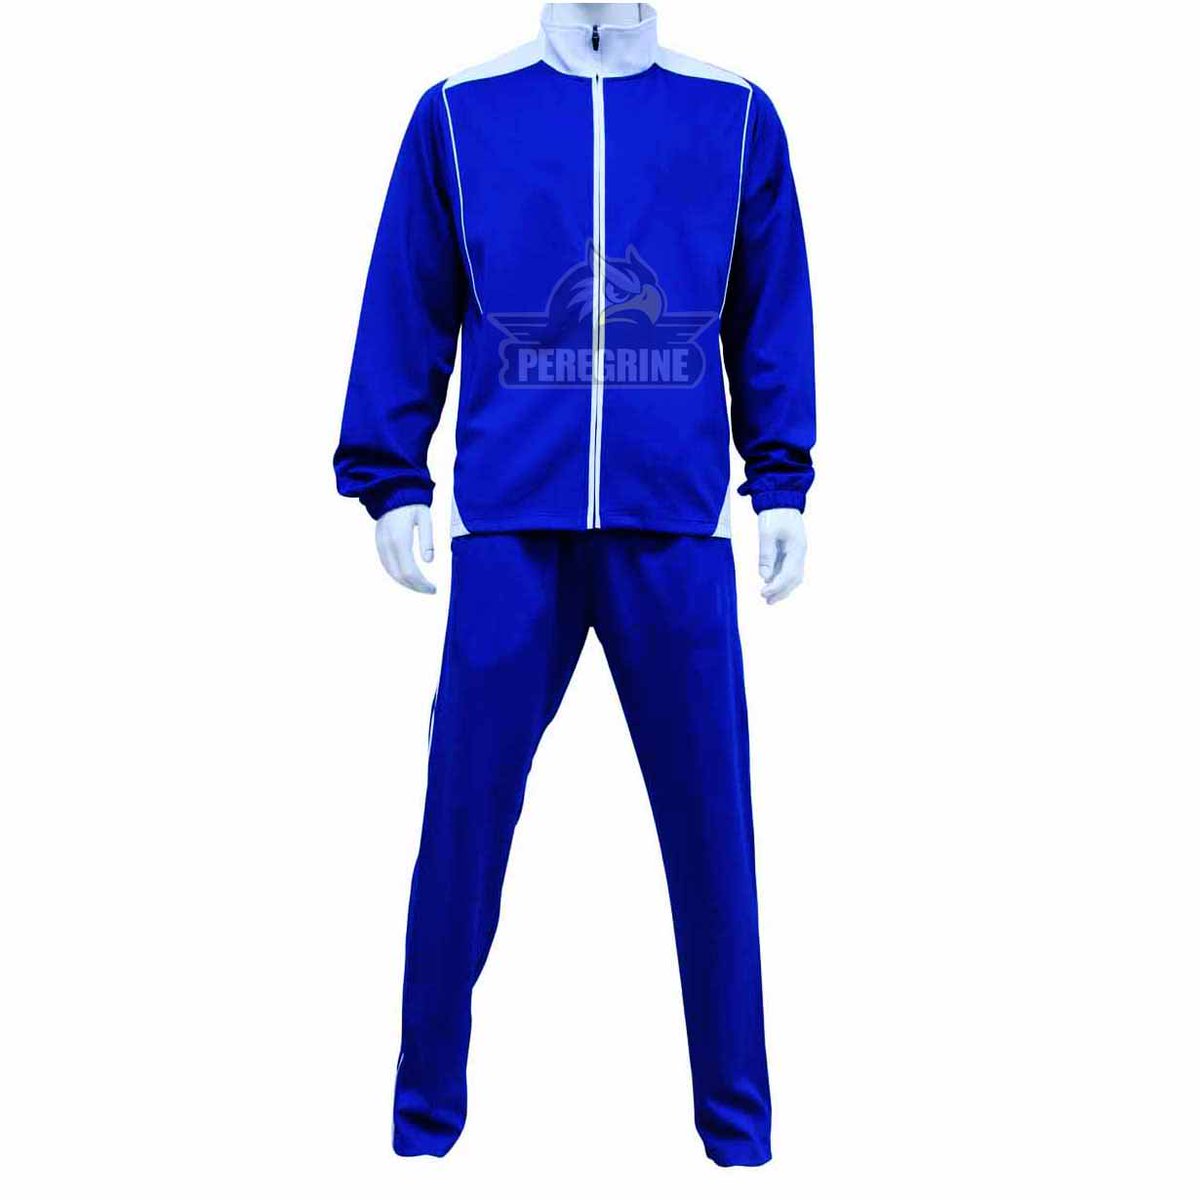 where to buy tracksuits near me